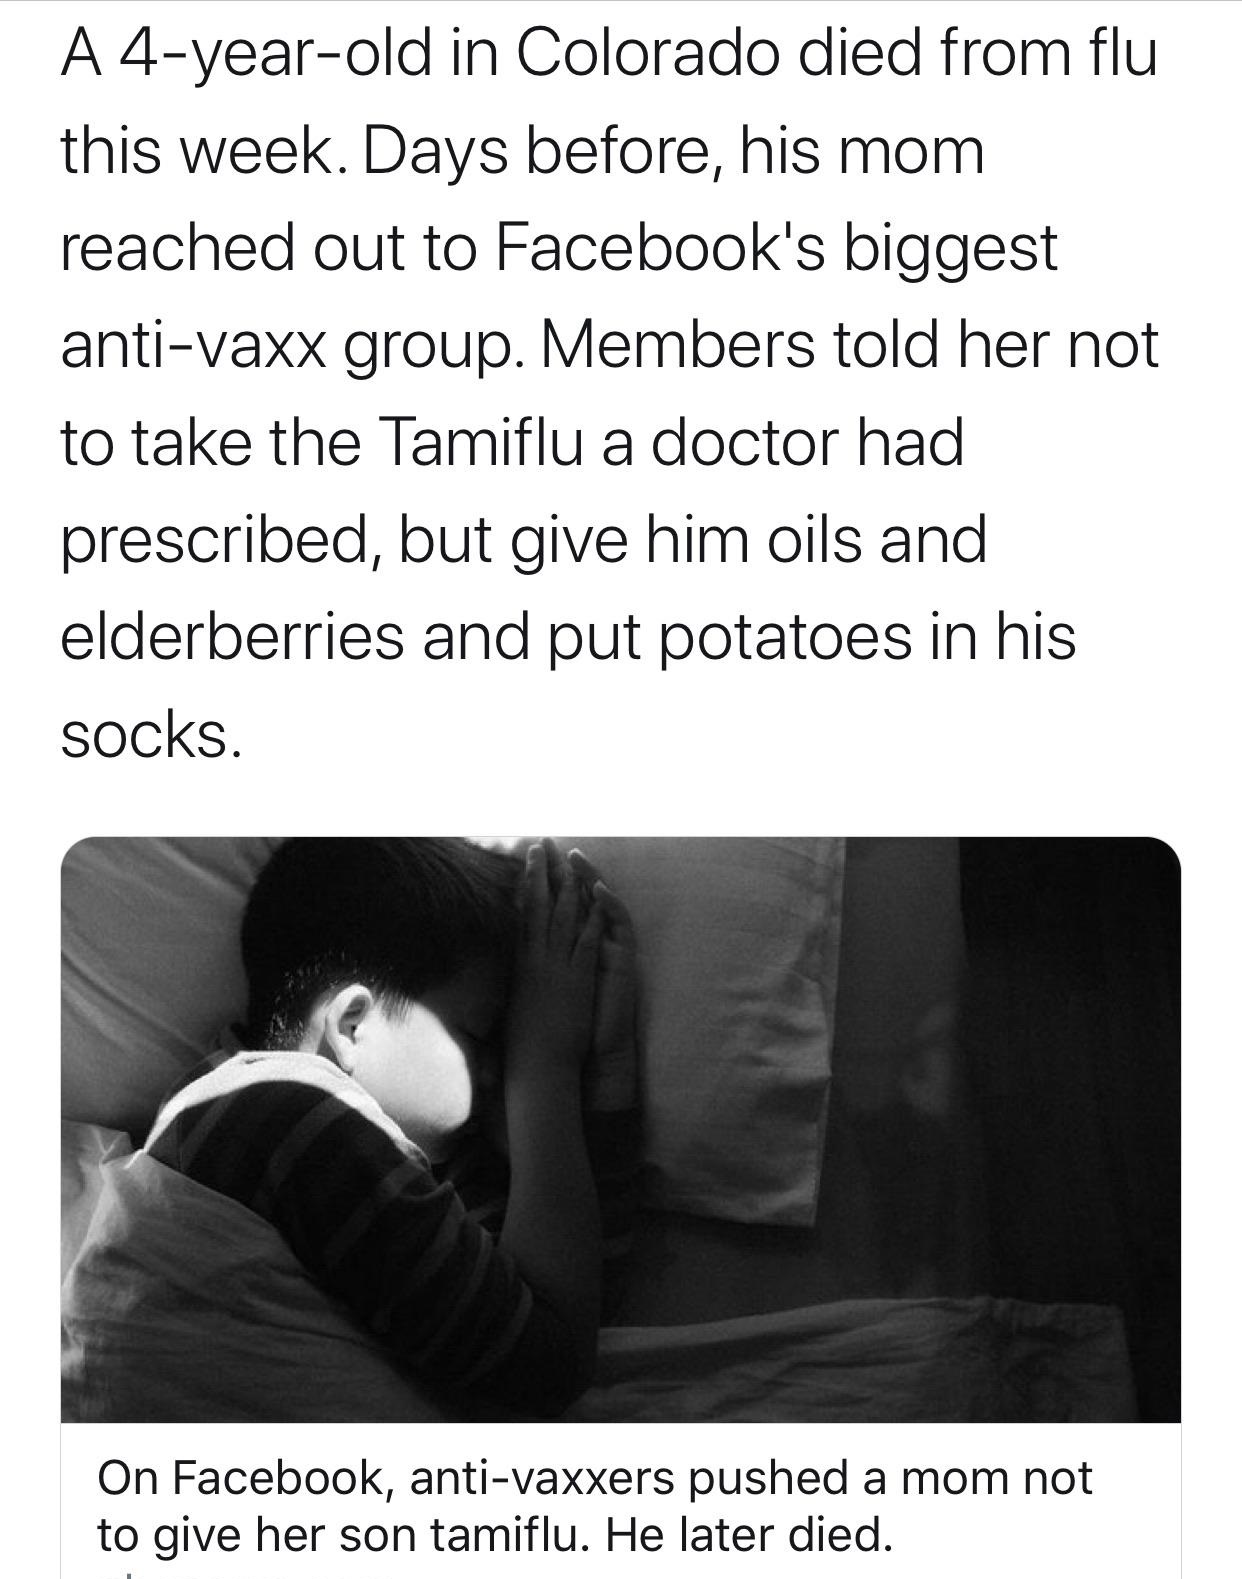 human behavior - A 4yearold in Colorado died from flu this week. Days before, his mom reached out to Facebook's biggest antivaxx group. Members told her not to take the Tamiflu a doctor had prescribed, but give him oils and elderberries and put potatoes i